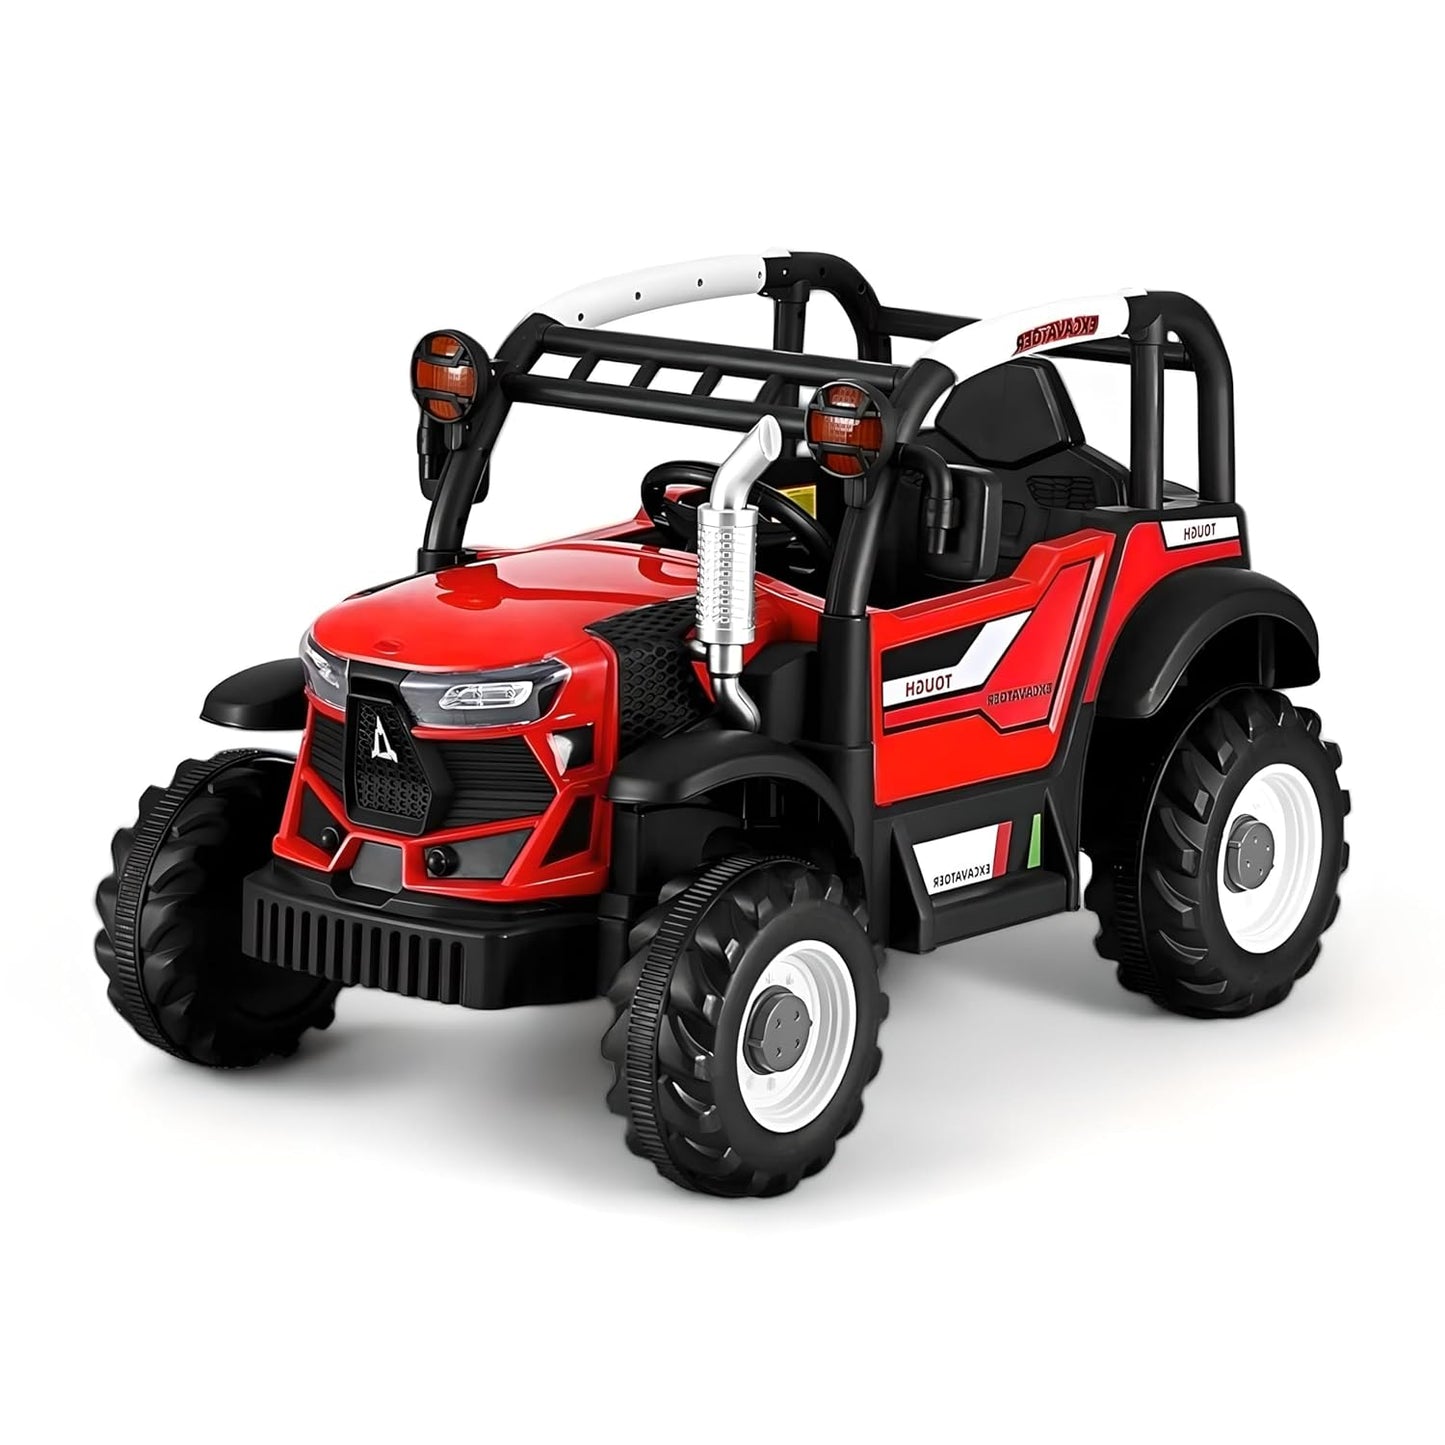 PATOYS | Kids Electric Ride-On Premium Tractor with Dual Control, Realistic Design, Music, Safe Driving excavator for Boys and Girls - (Ages 2-8) - Red - PATOYS